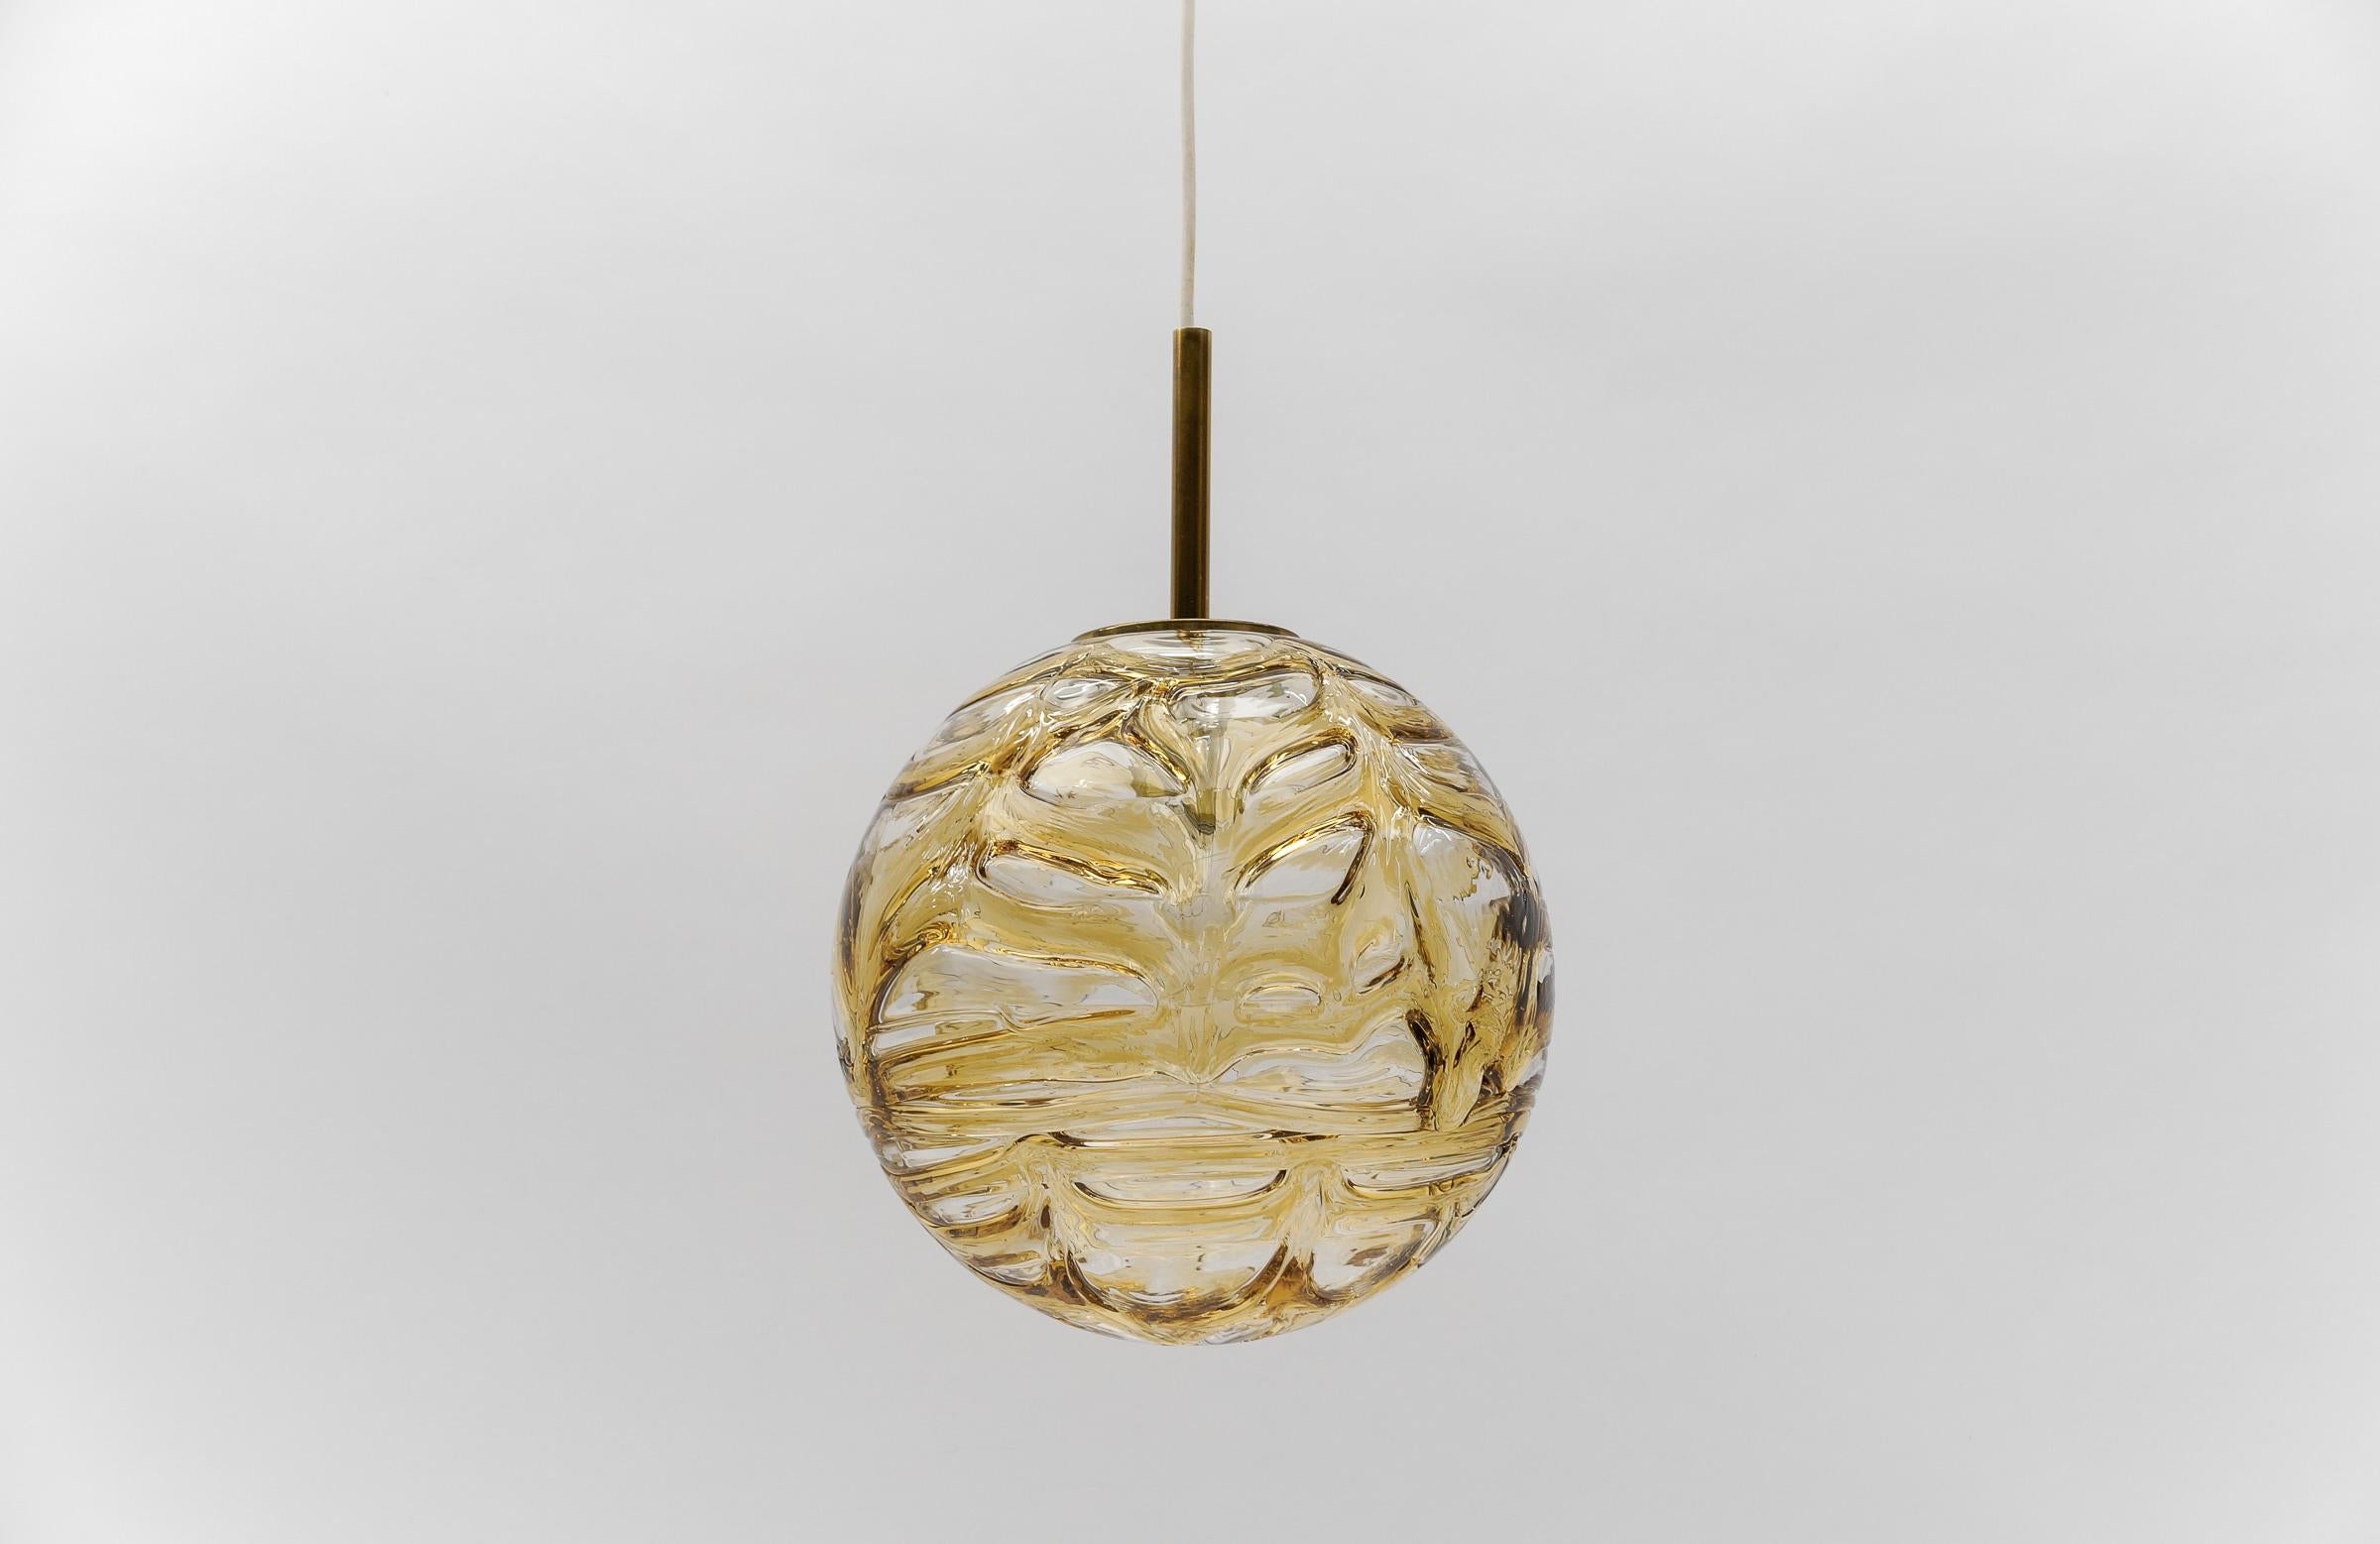 Yellow Murano Glass Ball Pendant Lamp by Doria, - 1960s Germany In Good Condition For Sale In Nürnberg, Bayern